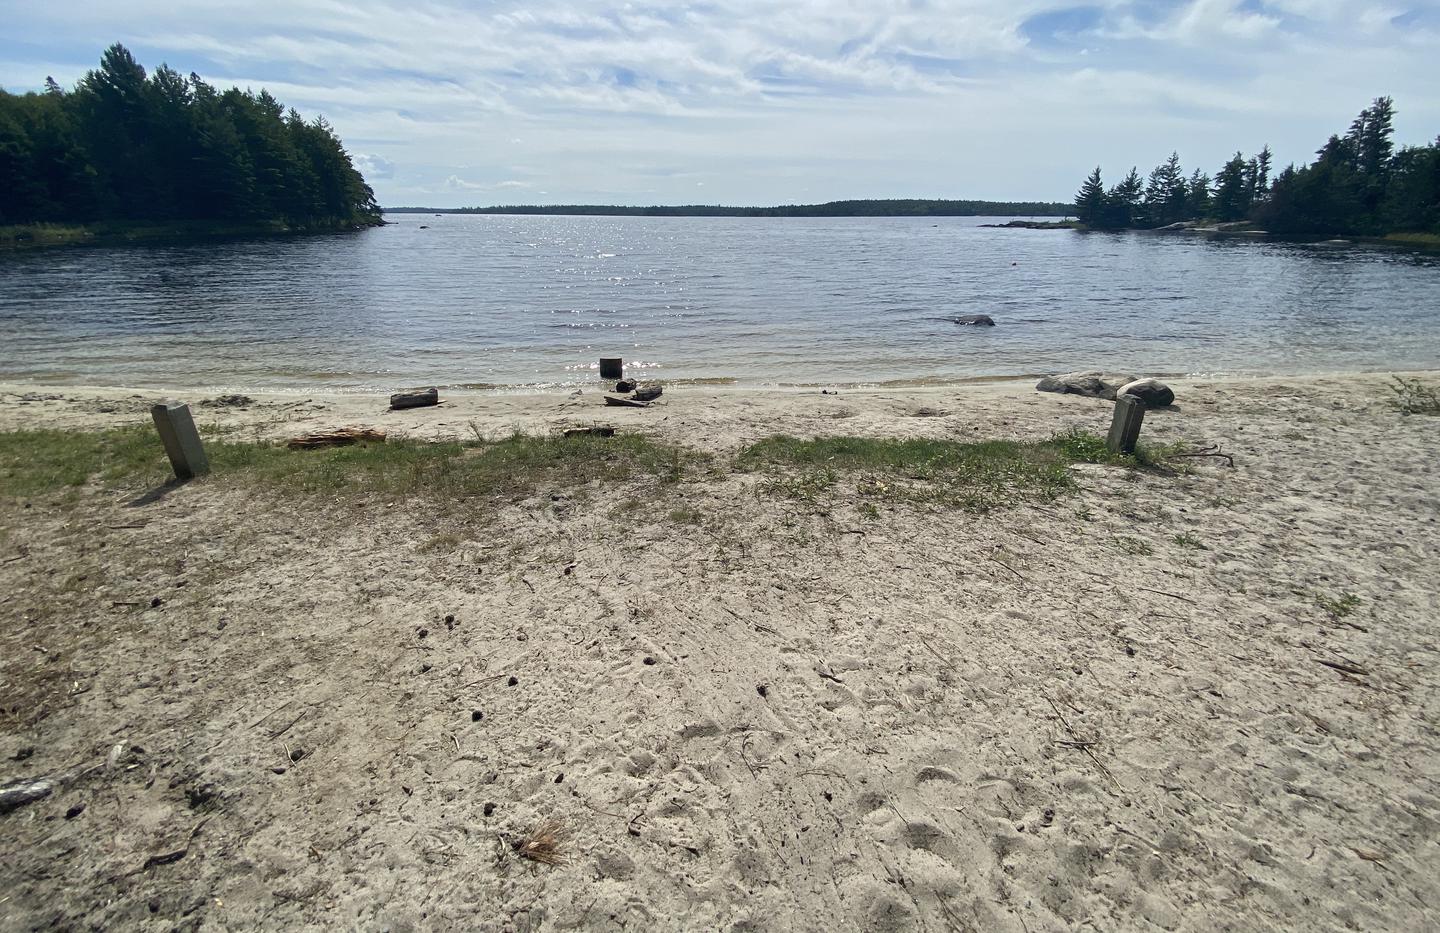 R106 - Shelland Island, view of boat access from shore with a couple of mooring posts.View of boat access from campsite